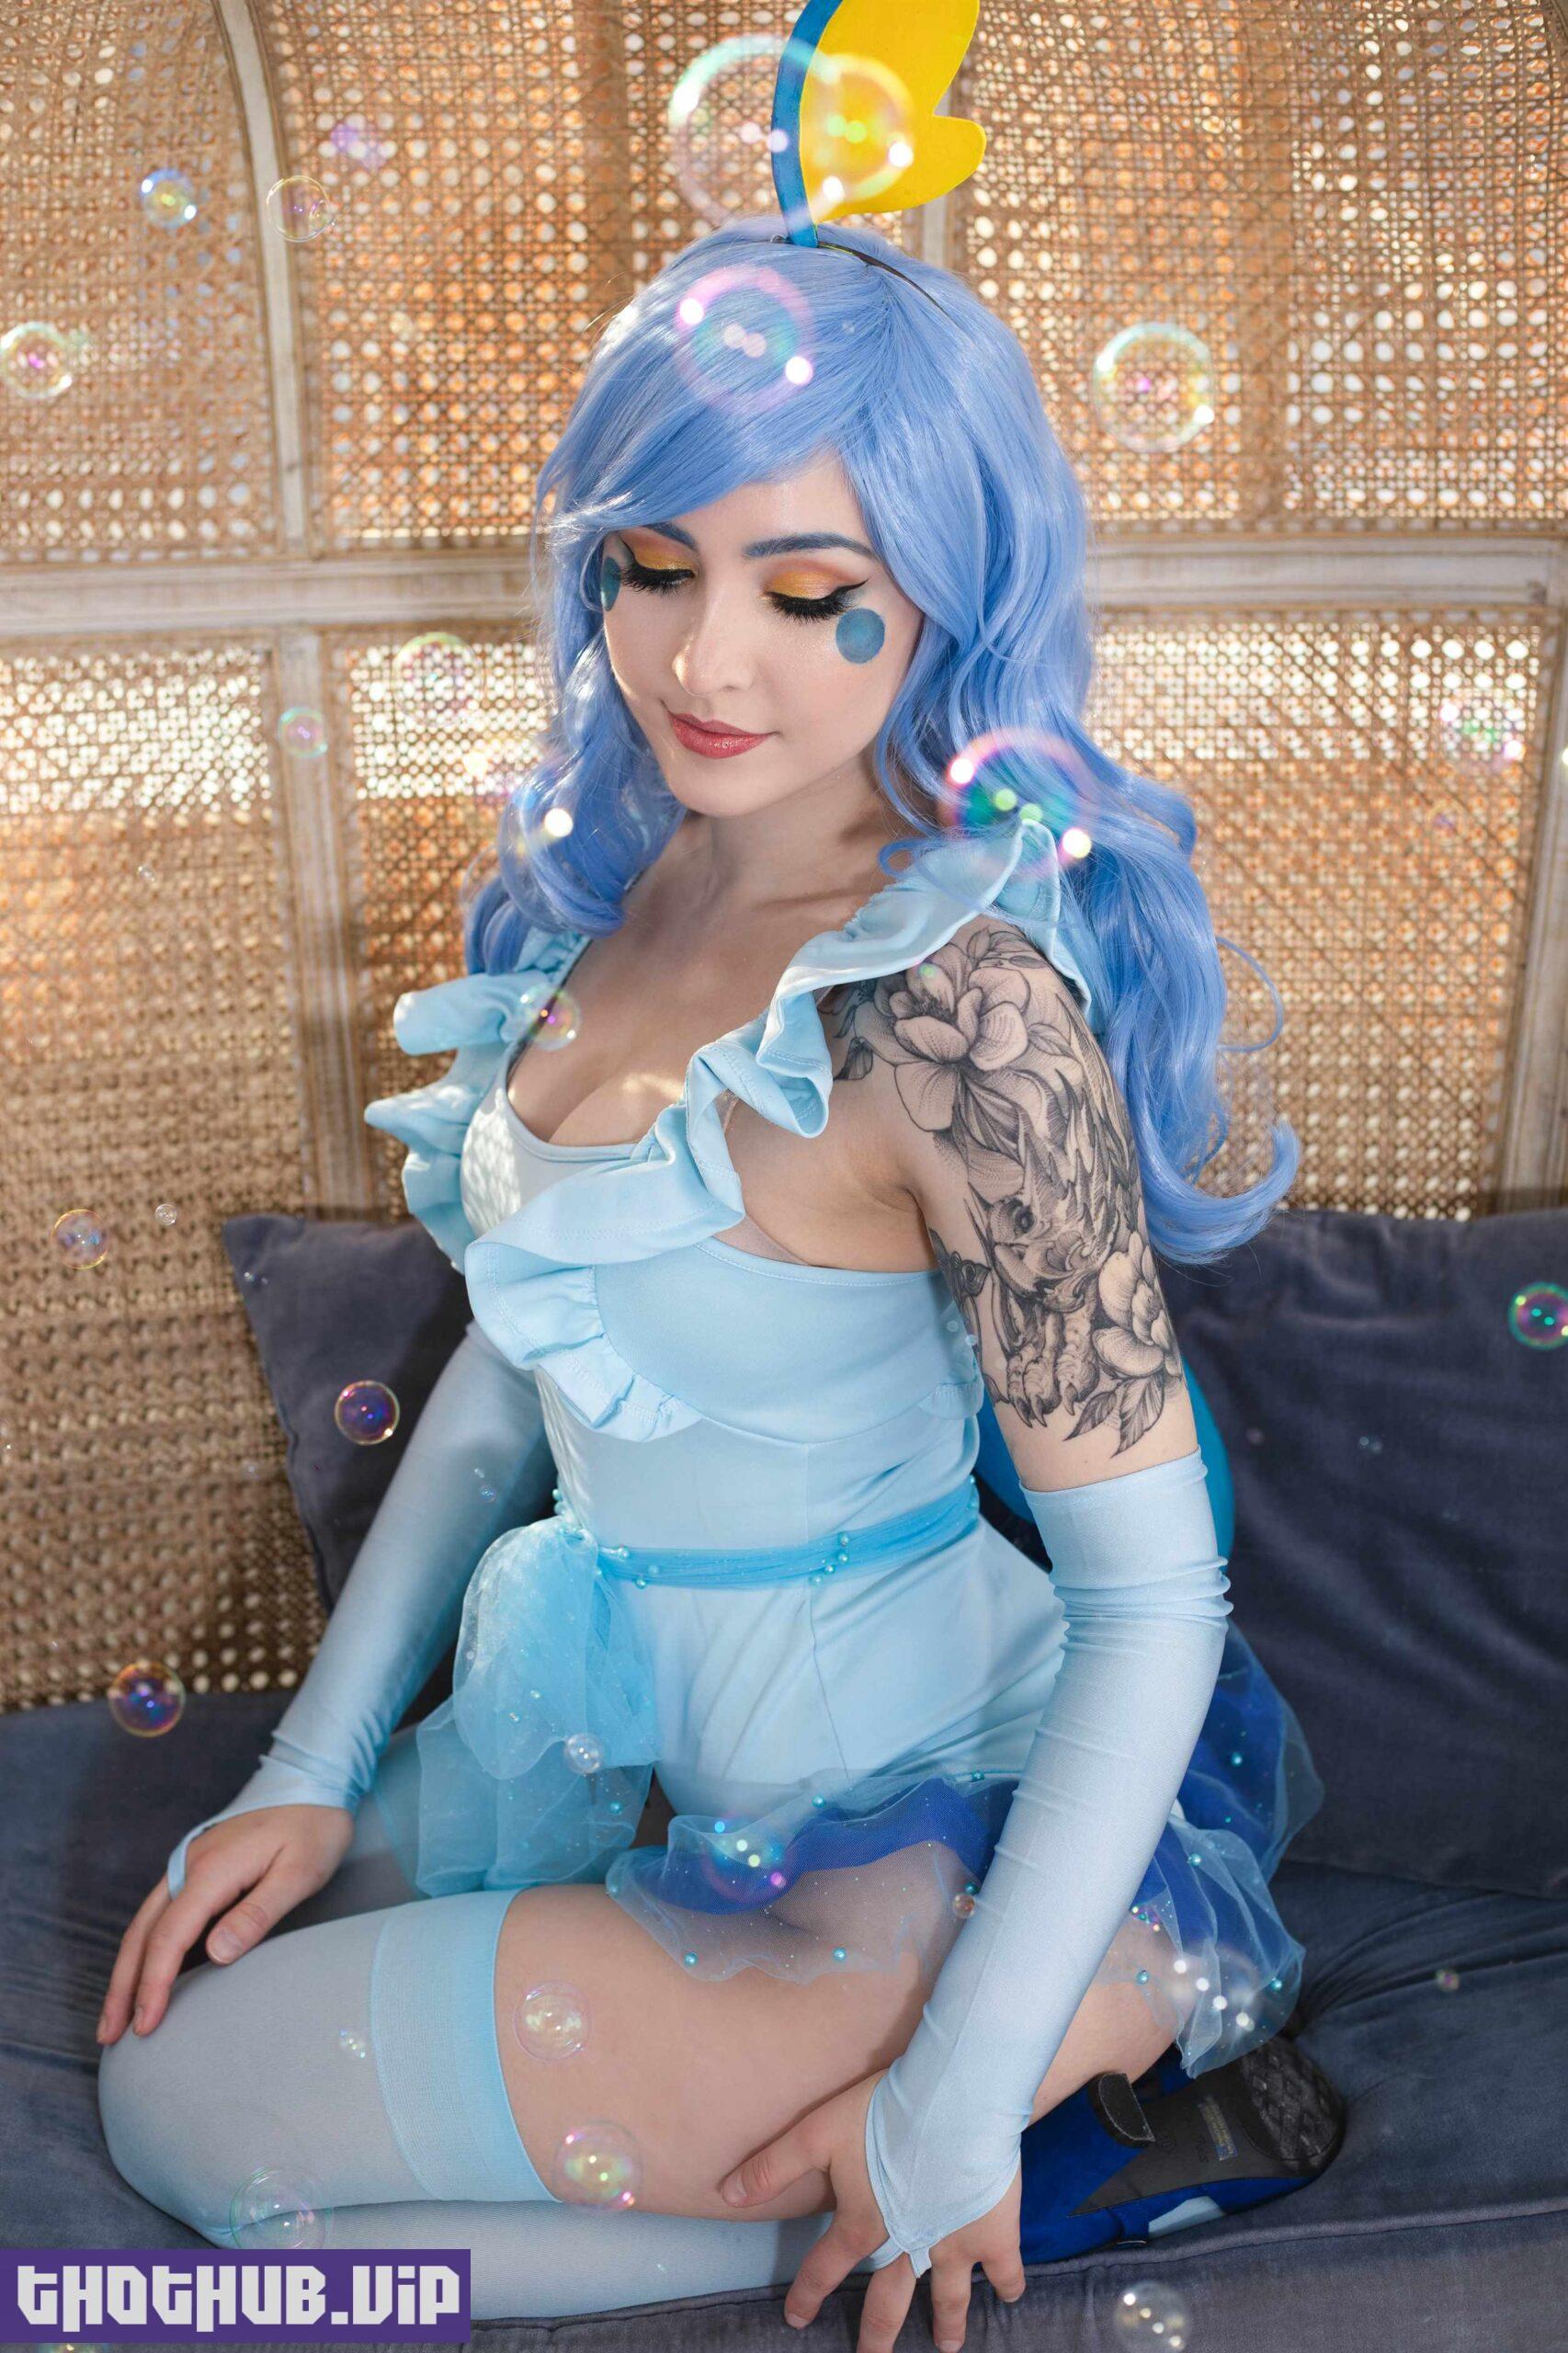 1649963407 499 Luxlo Cosplay Sobble 20 scaled